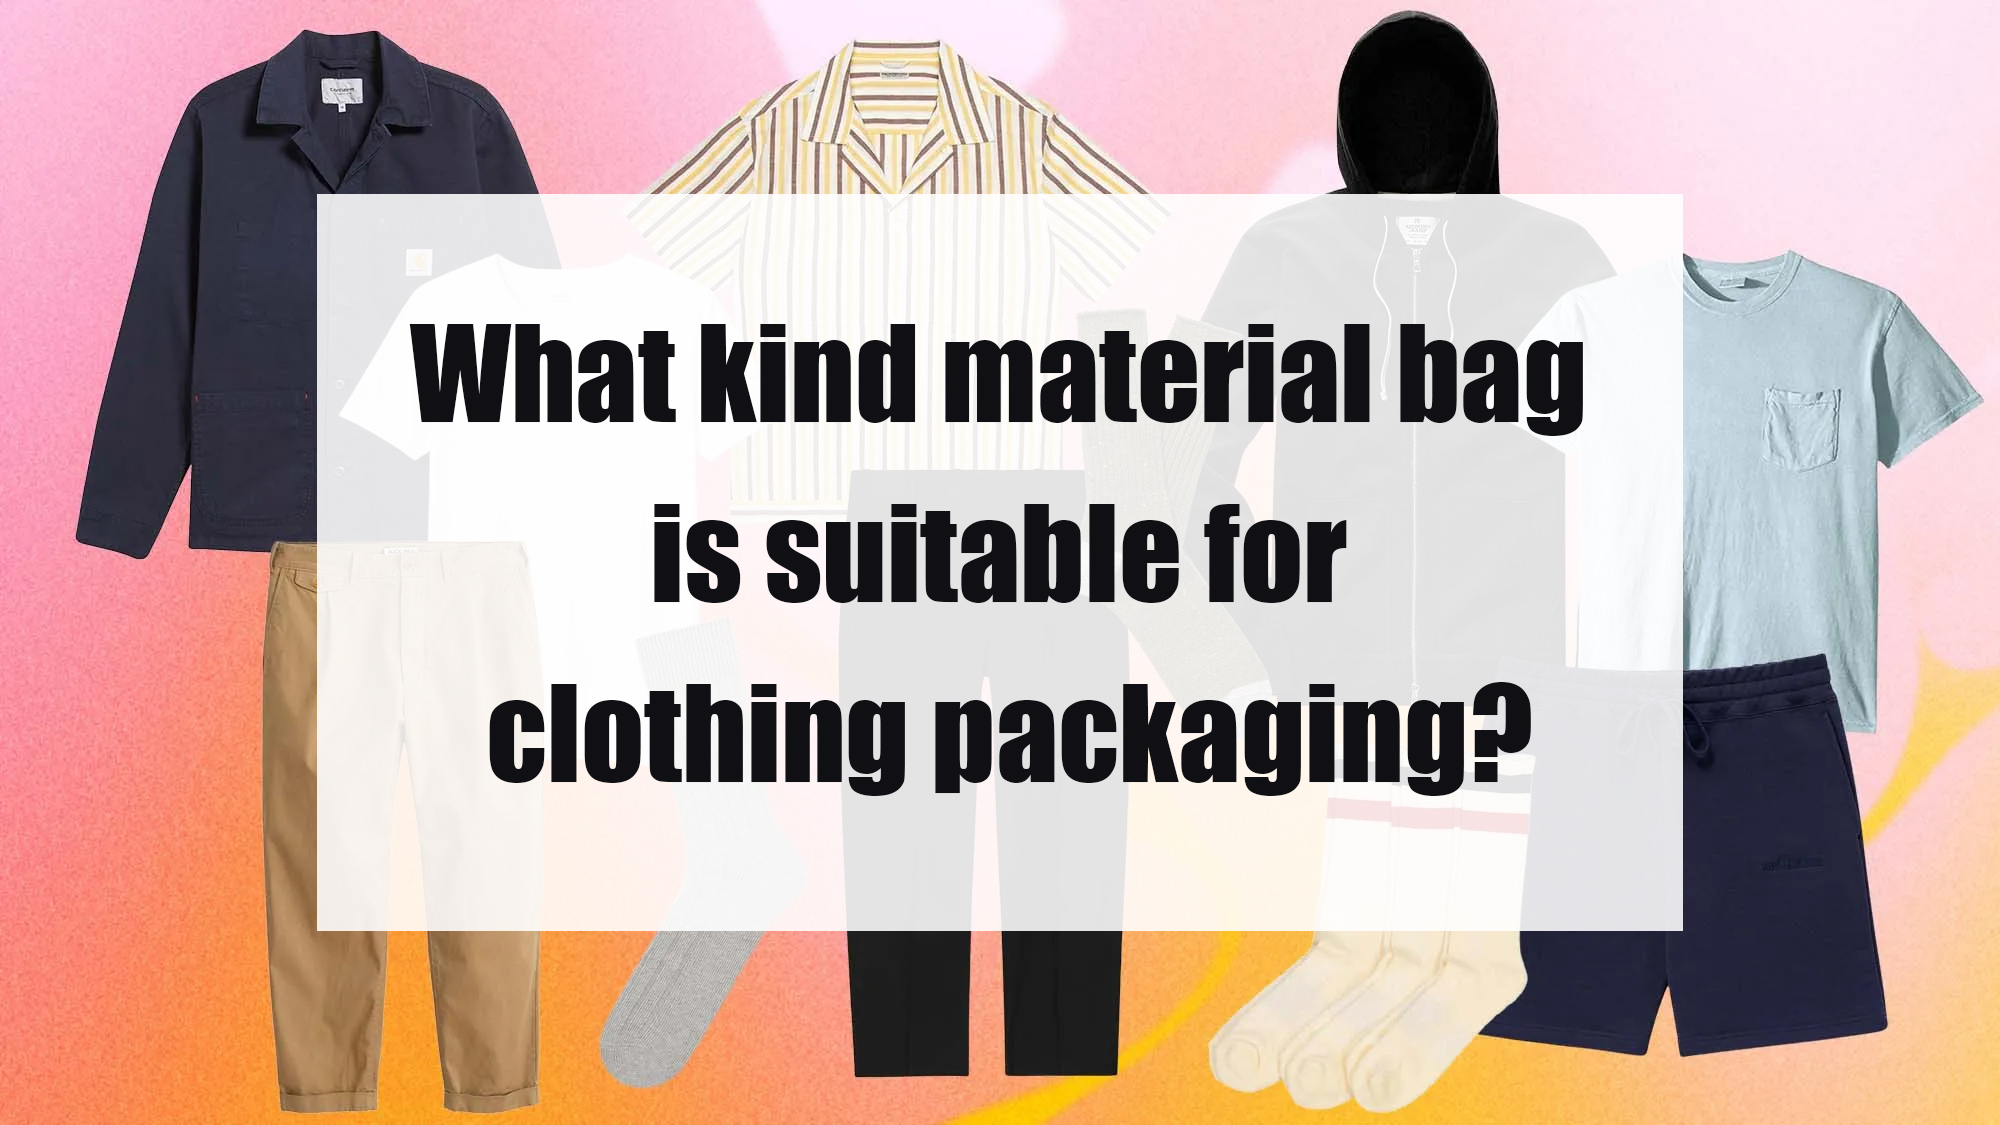 What kind material bag is suitable for clothing packaging?